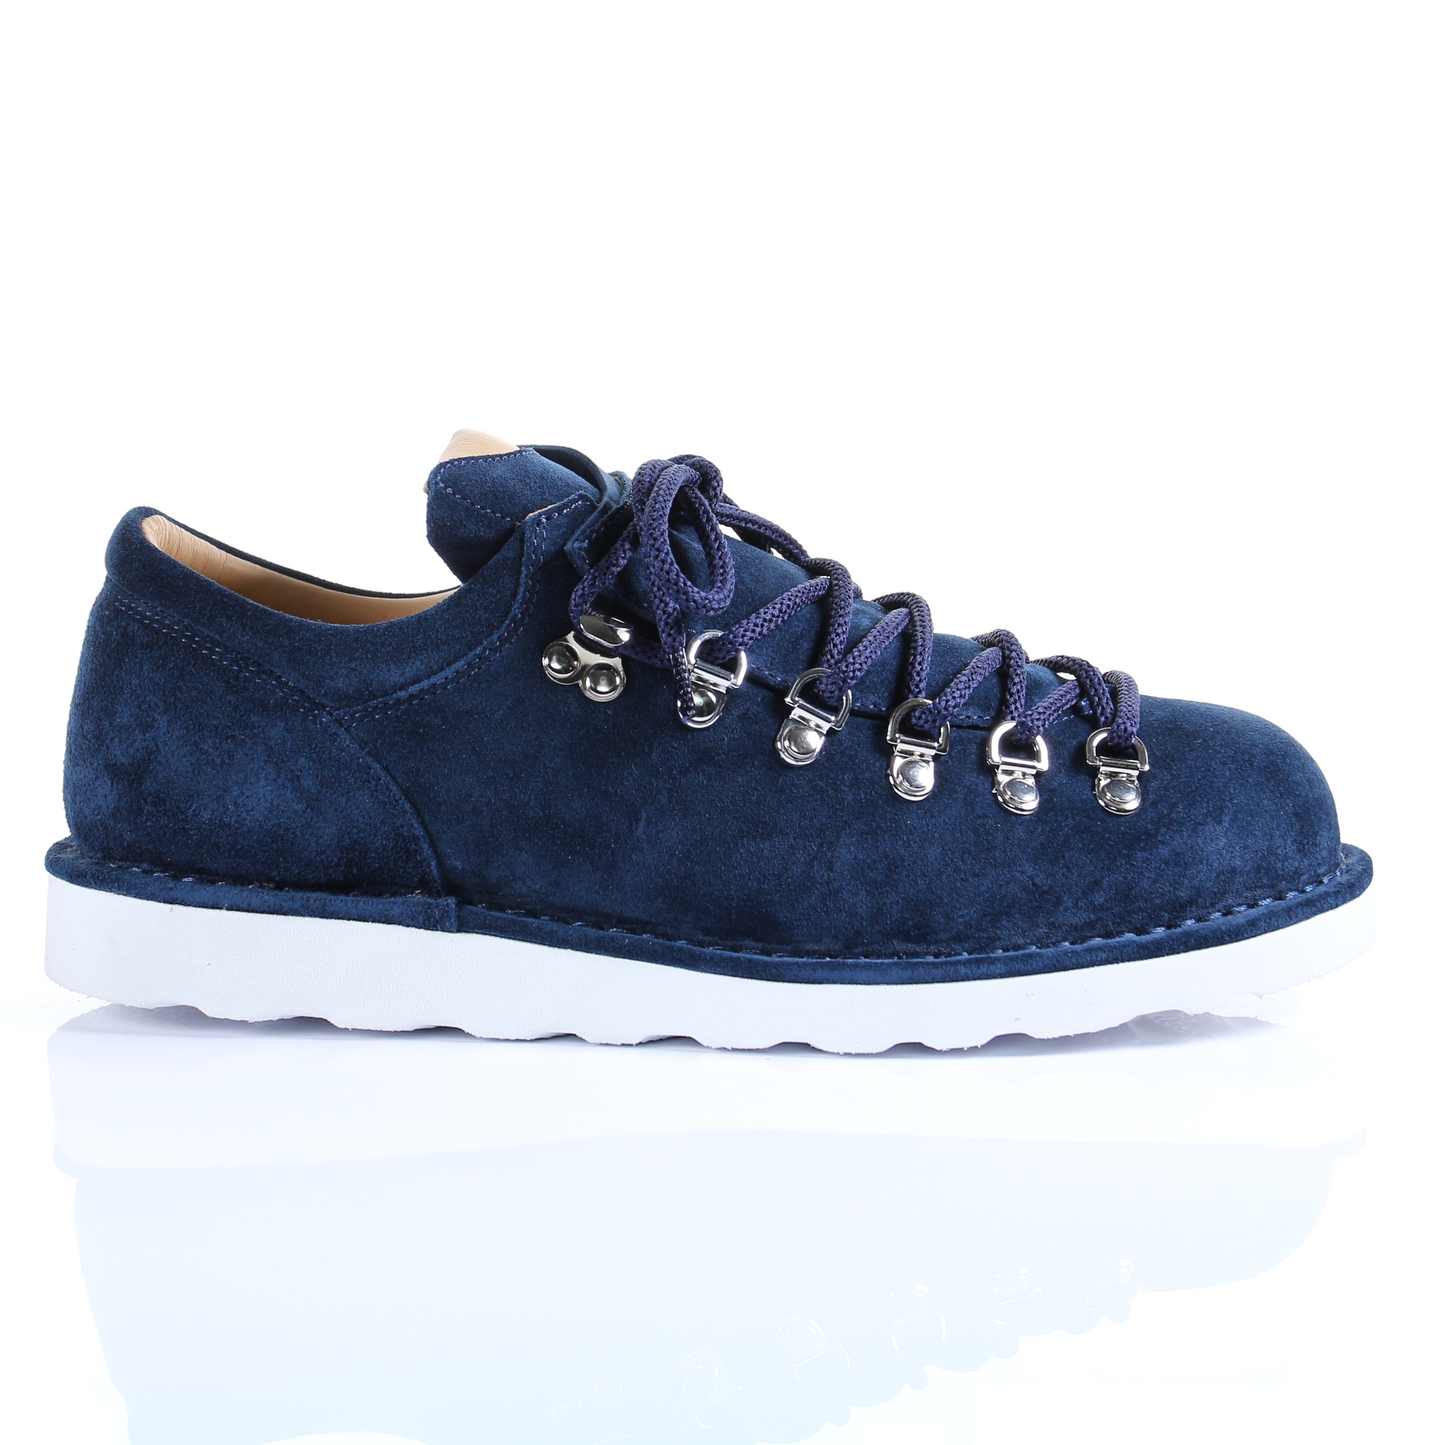 Men's Style Suede Mountain Shoes (Navy)